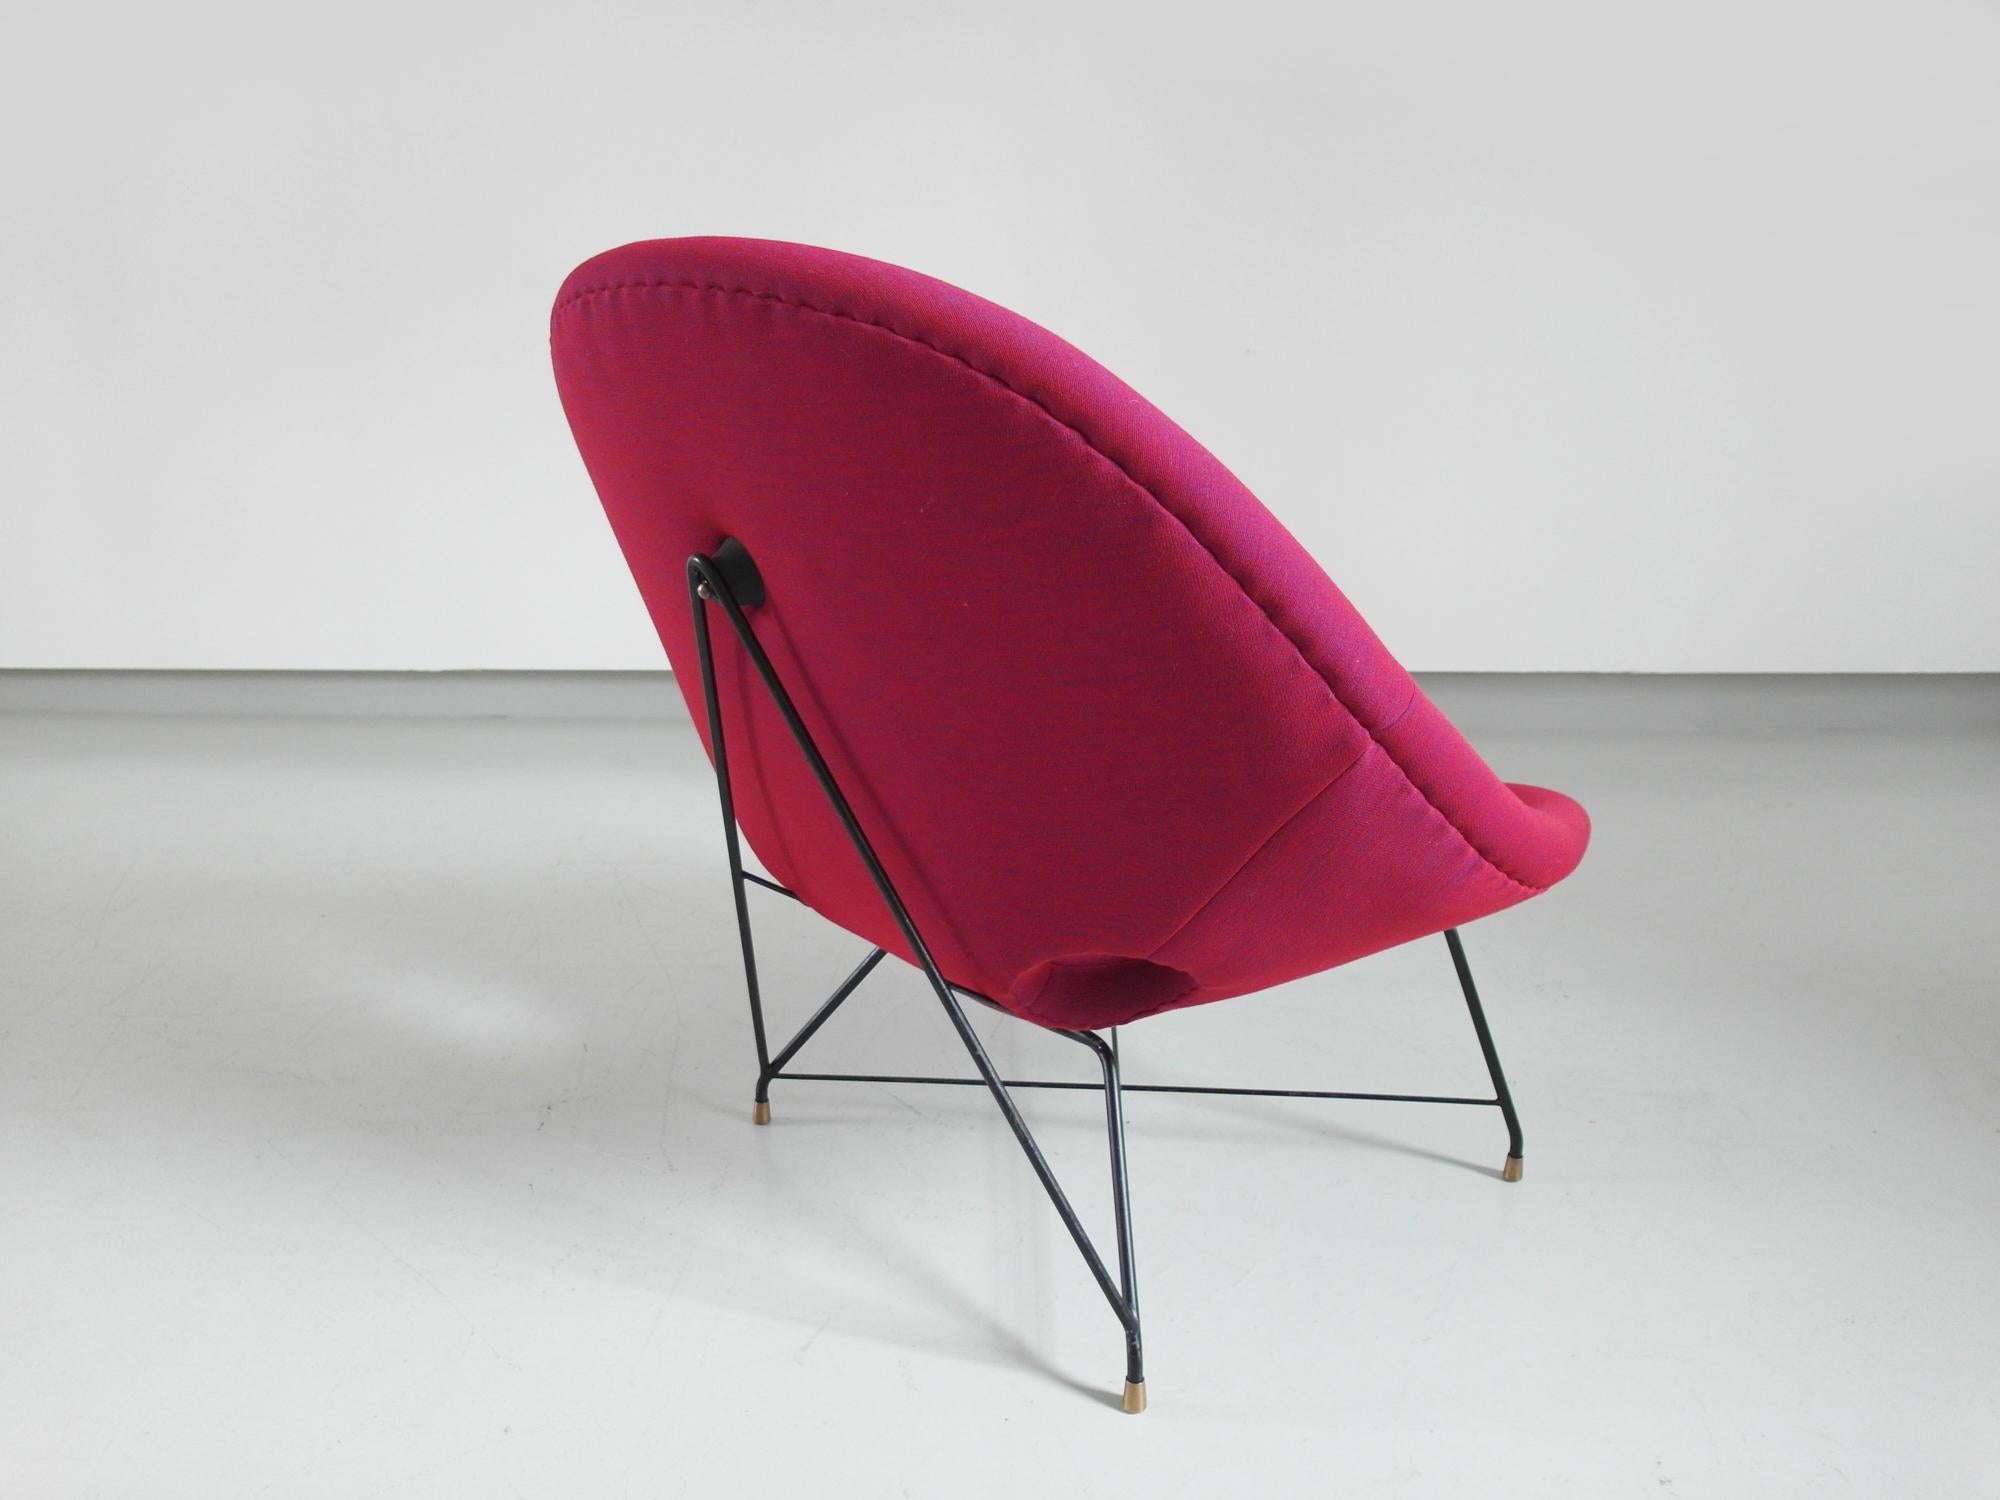 Pair of Cosmos Chairs in Ruby red/ Raspberry red by Augusto Bozzi for Saporiti For Sale 2